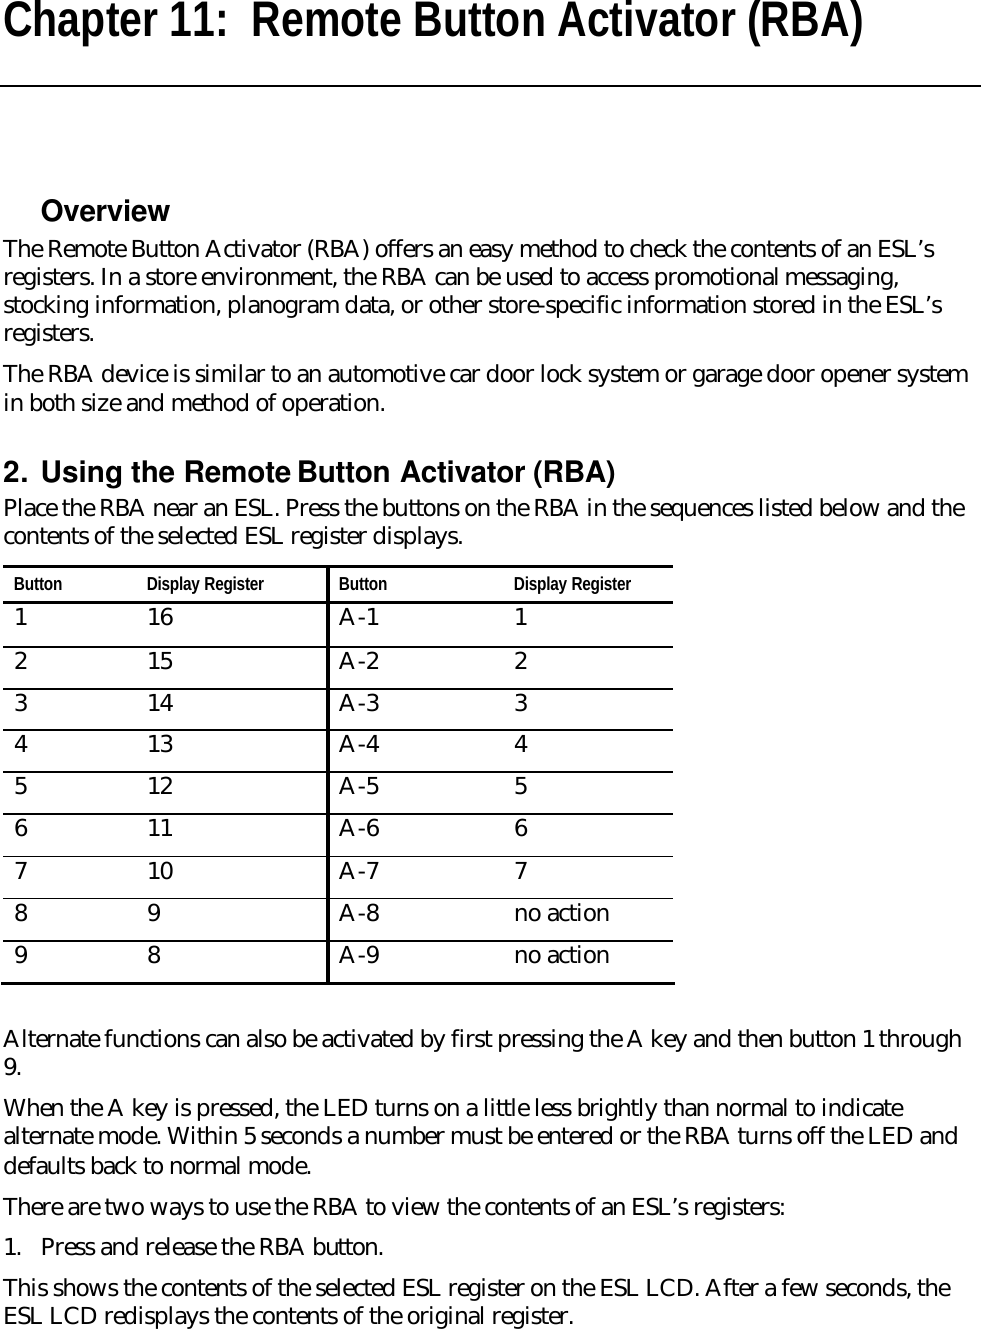 Chapter 11:  Remote Button Activator (RBA)  Overview The Remote Button Activator (RBA) offers an easy method to check the contents of an ESL’s registers. In a store environment, the RBA can be used to access promotional messaging, stocking information, planogram data, or other store-specific information stored in the ESL’s registers. The RBA device is similar to an automotive car door lock system or garage door opener system in both size and method of operation.   2. Using the Remote Button Activator (RBA) Place the RBA near an ESL. Press the buttons on the RBA in the sequences listed below and the contents of the selected ESL register displays. Button Display Register Button Display Register 1 16 A-1 1 2 15 A-2 2 3 14 A-3 3  4 13 A-4 4  5 12 A-5 5 6 11 A-6 6 7 10 A-7 7 8 9 A-8 no action 9 8 A-9 no action  Alternate functions can also be activated by first pressing the A key and then button 1 through 9.  When the A key is pressed, the LED turns on a little less brightly than normal to indicate alternate mode. Within 5 seconds a number must be entered or the RBA turns off the LED and defaults back to normal mode. There are two ways to use the RBA to view the contents of an ESL’s registers: 1. Press and release the RBA button. This shows the contents of the selected ESL register on the ESL LCD. After a few seconds, the ESL LCD redisplays the contents of the original register. 